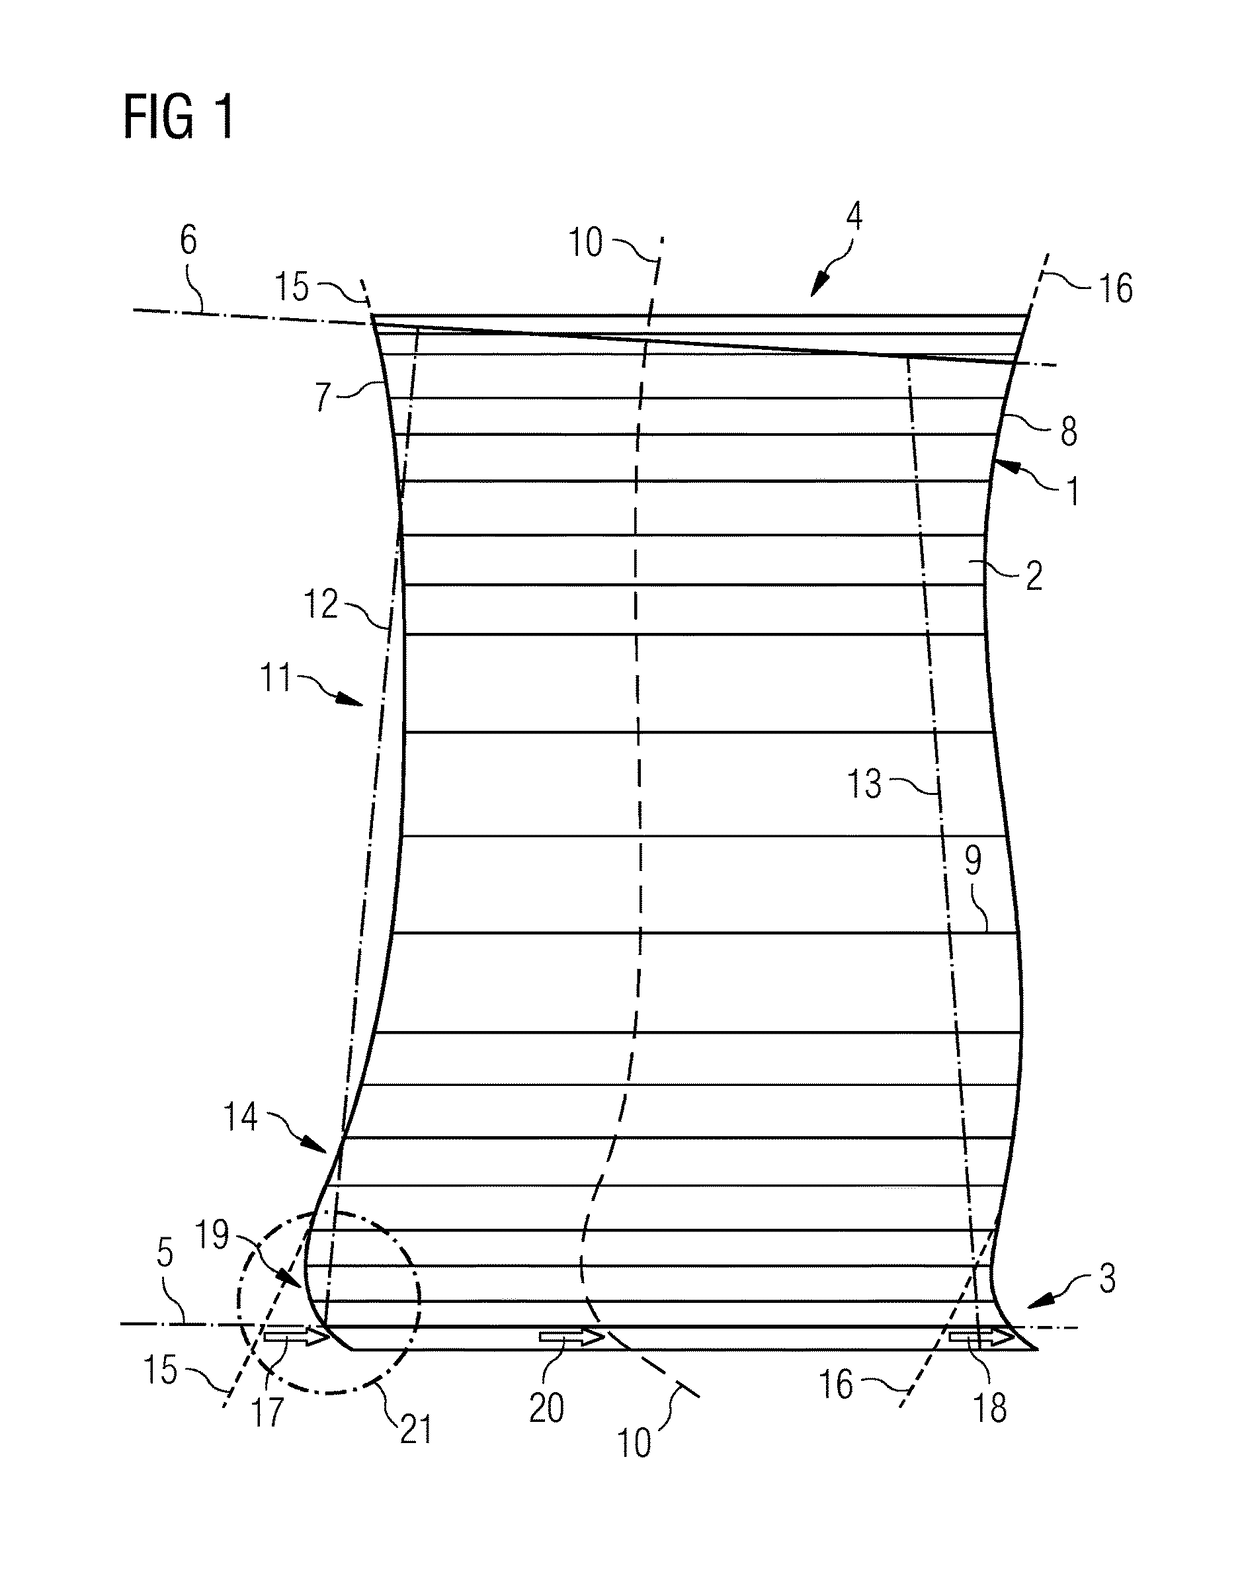 Method for profiling a replacement blade as a replacement part for an old blade for an axial-flow turbomachine